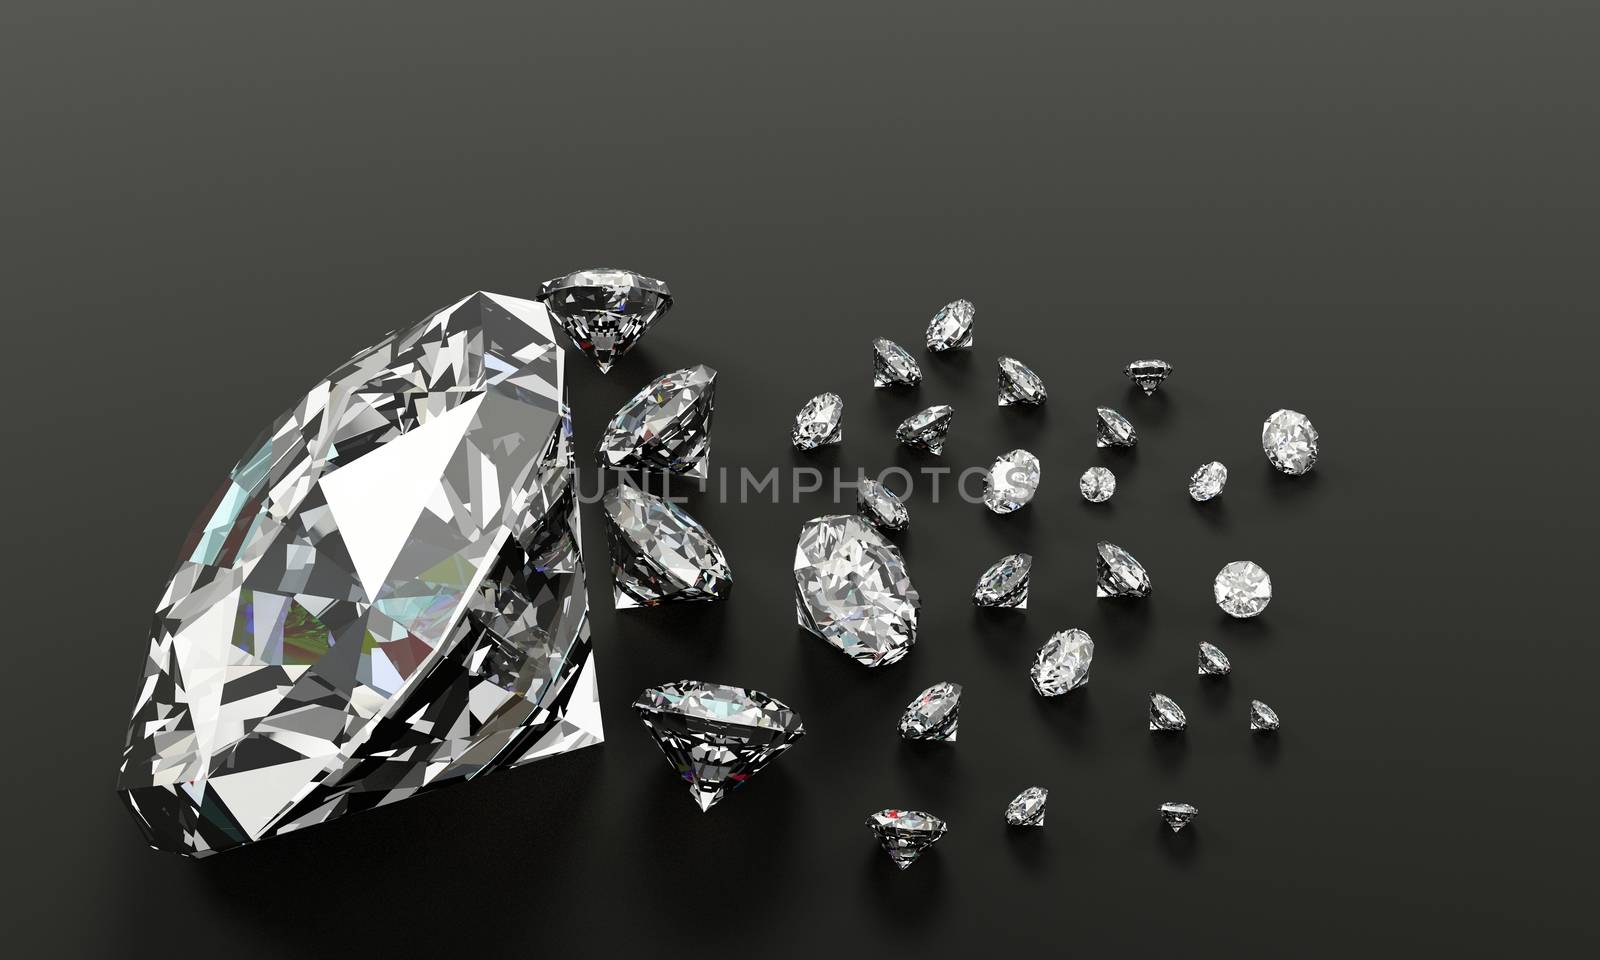 3D Rendering many size diamonds on gray  leather surface